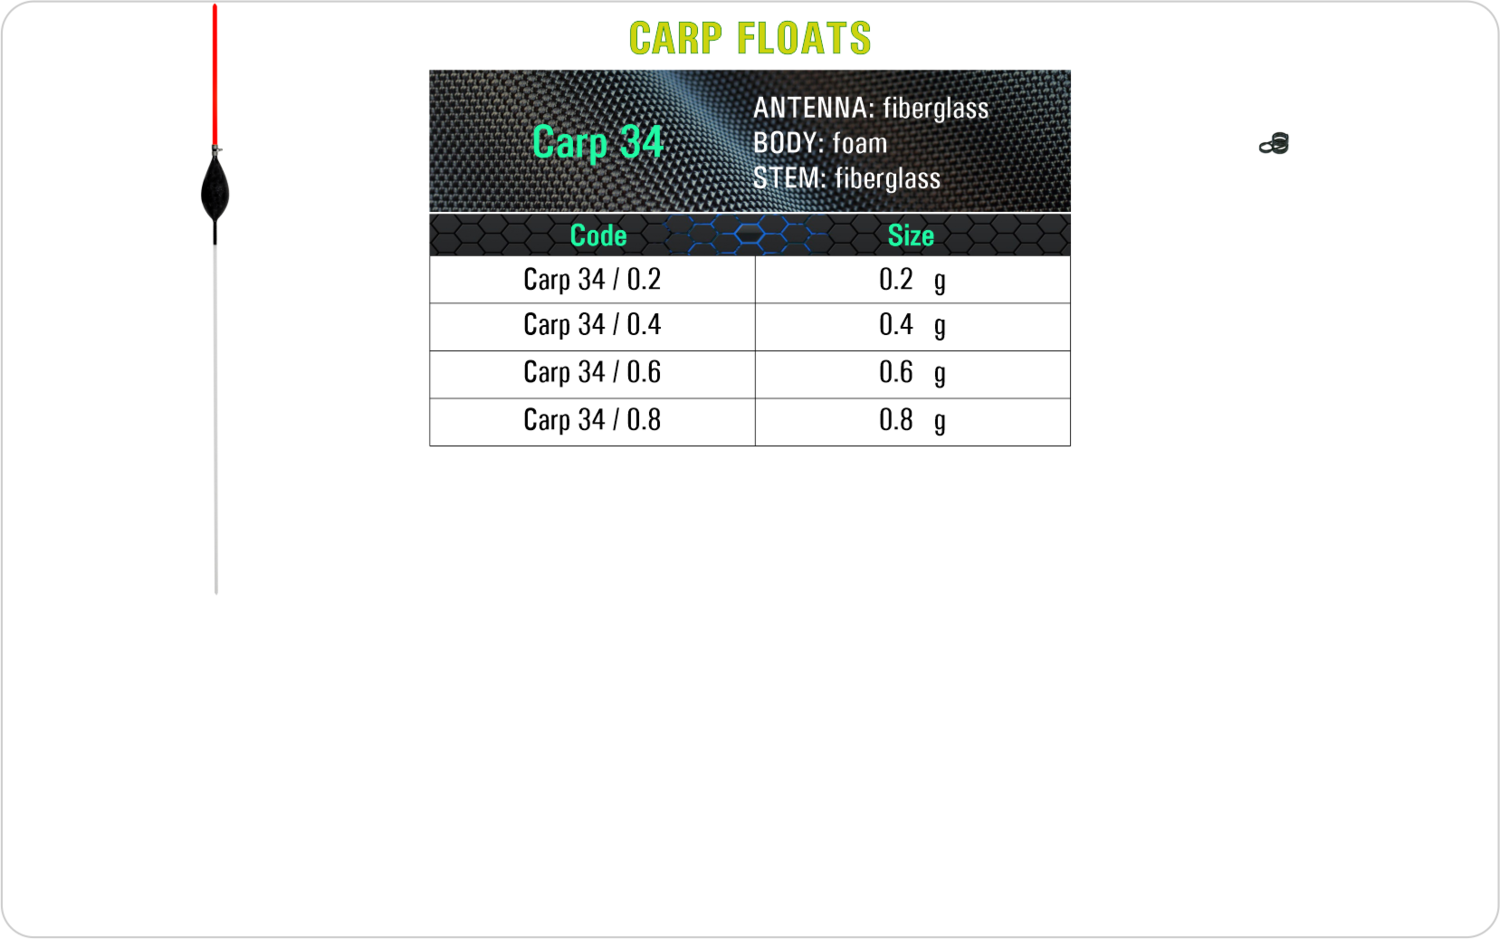 SF Carp 34 Carp float model and table containing an additional information about this float with different codes, sizes, types of the body, the stem and the antenna of the float.